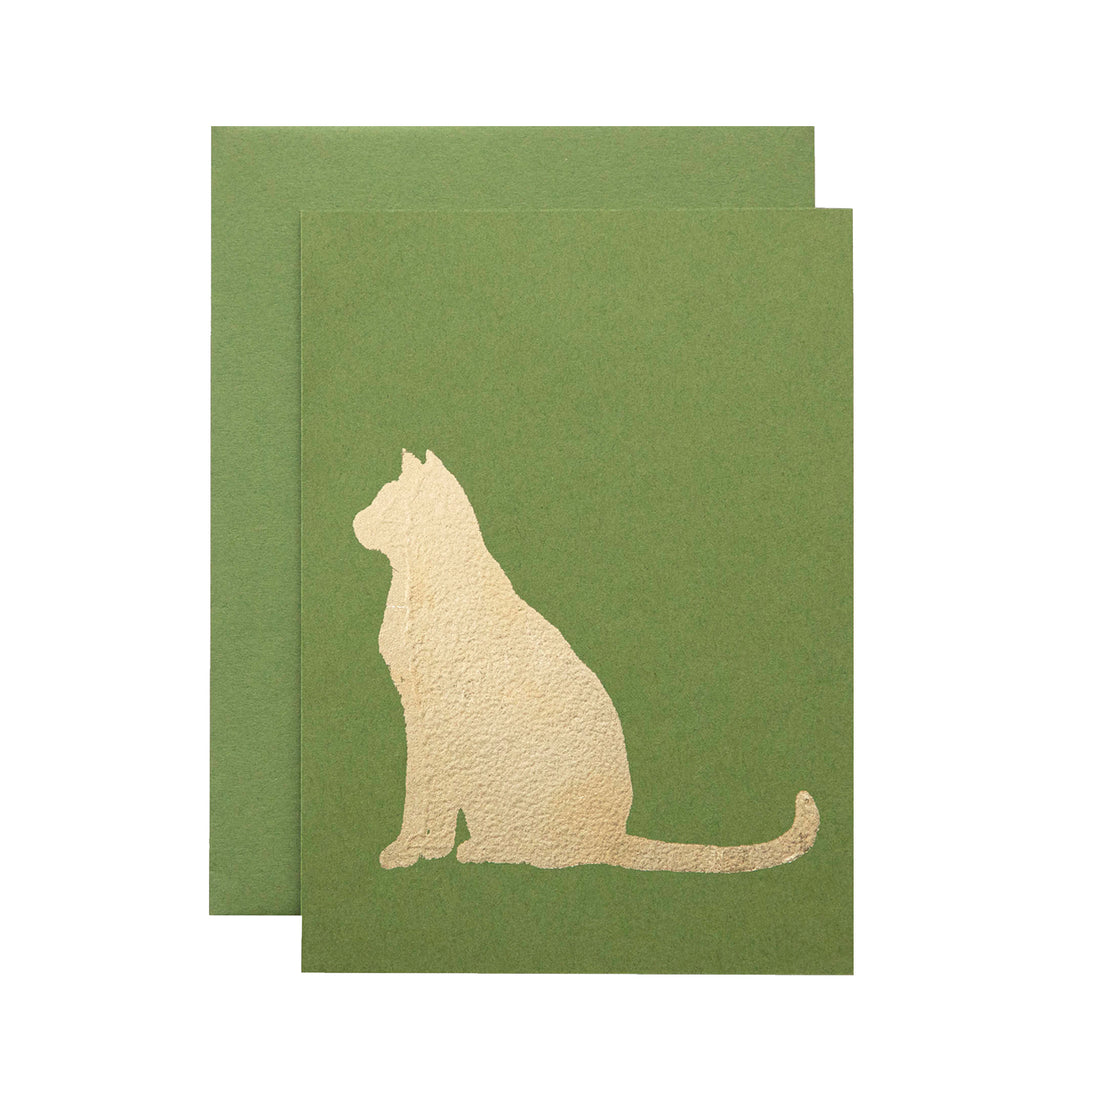 A leaf-green card with the silhouette of a cat in solid gold leaf.